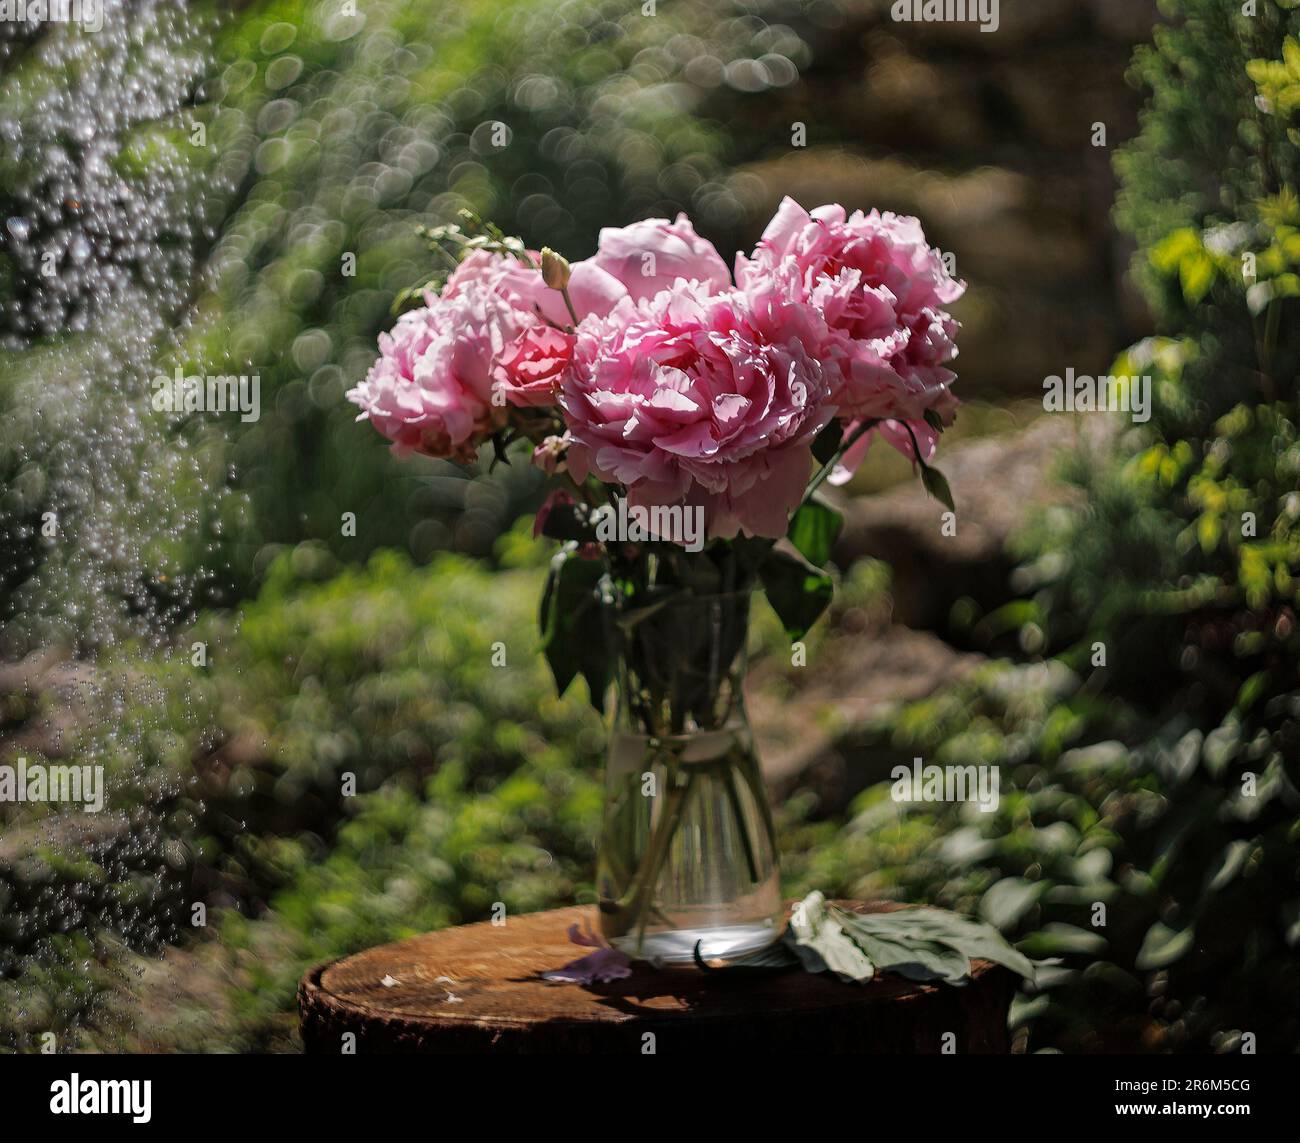 Bouquet of beautiful pink peonies on the sawing of a tree on a blurred green natural background with raindrops Stock Photo